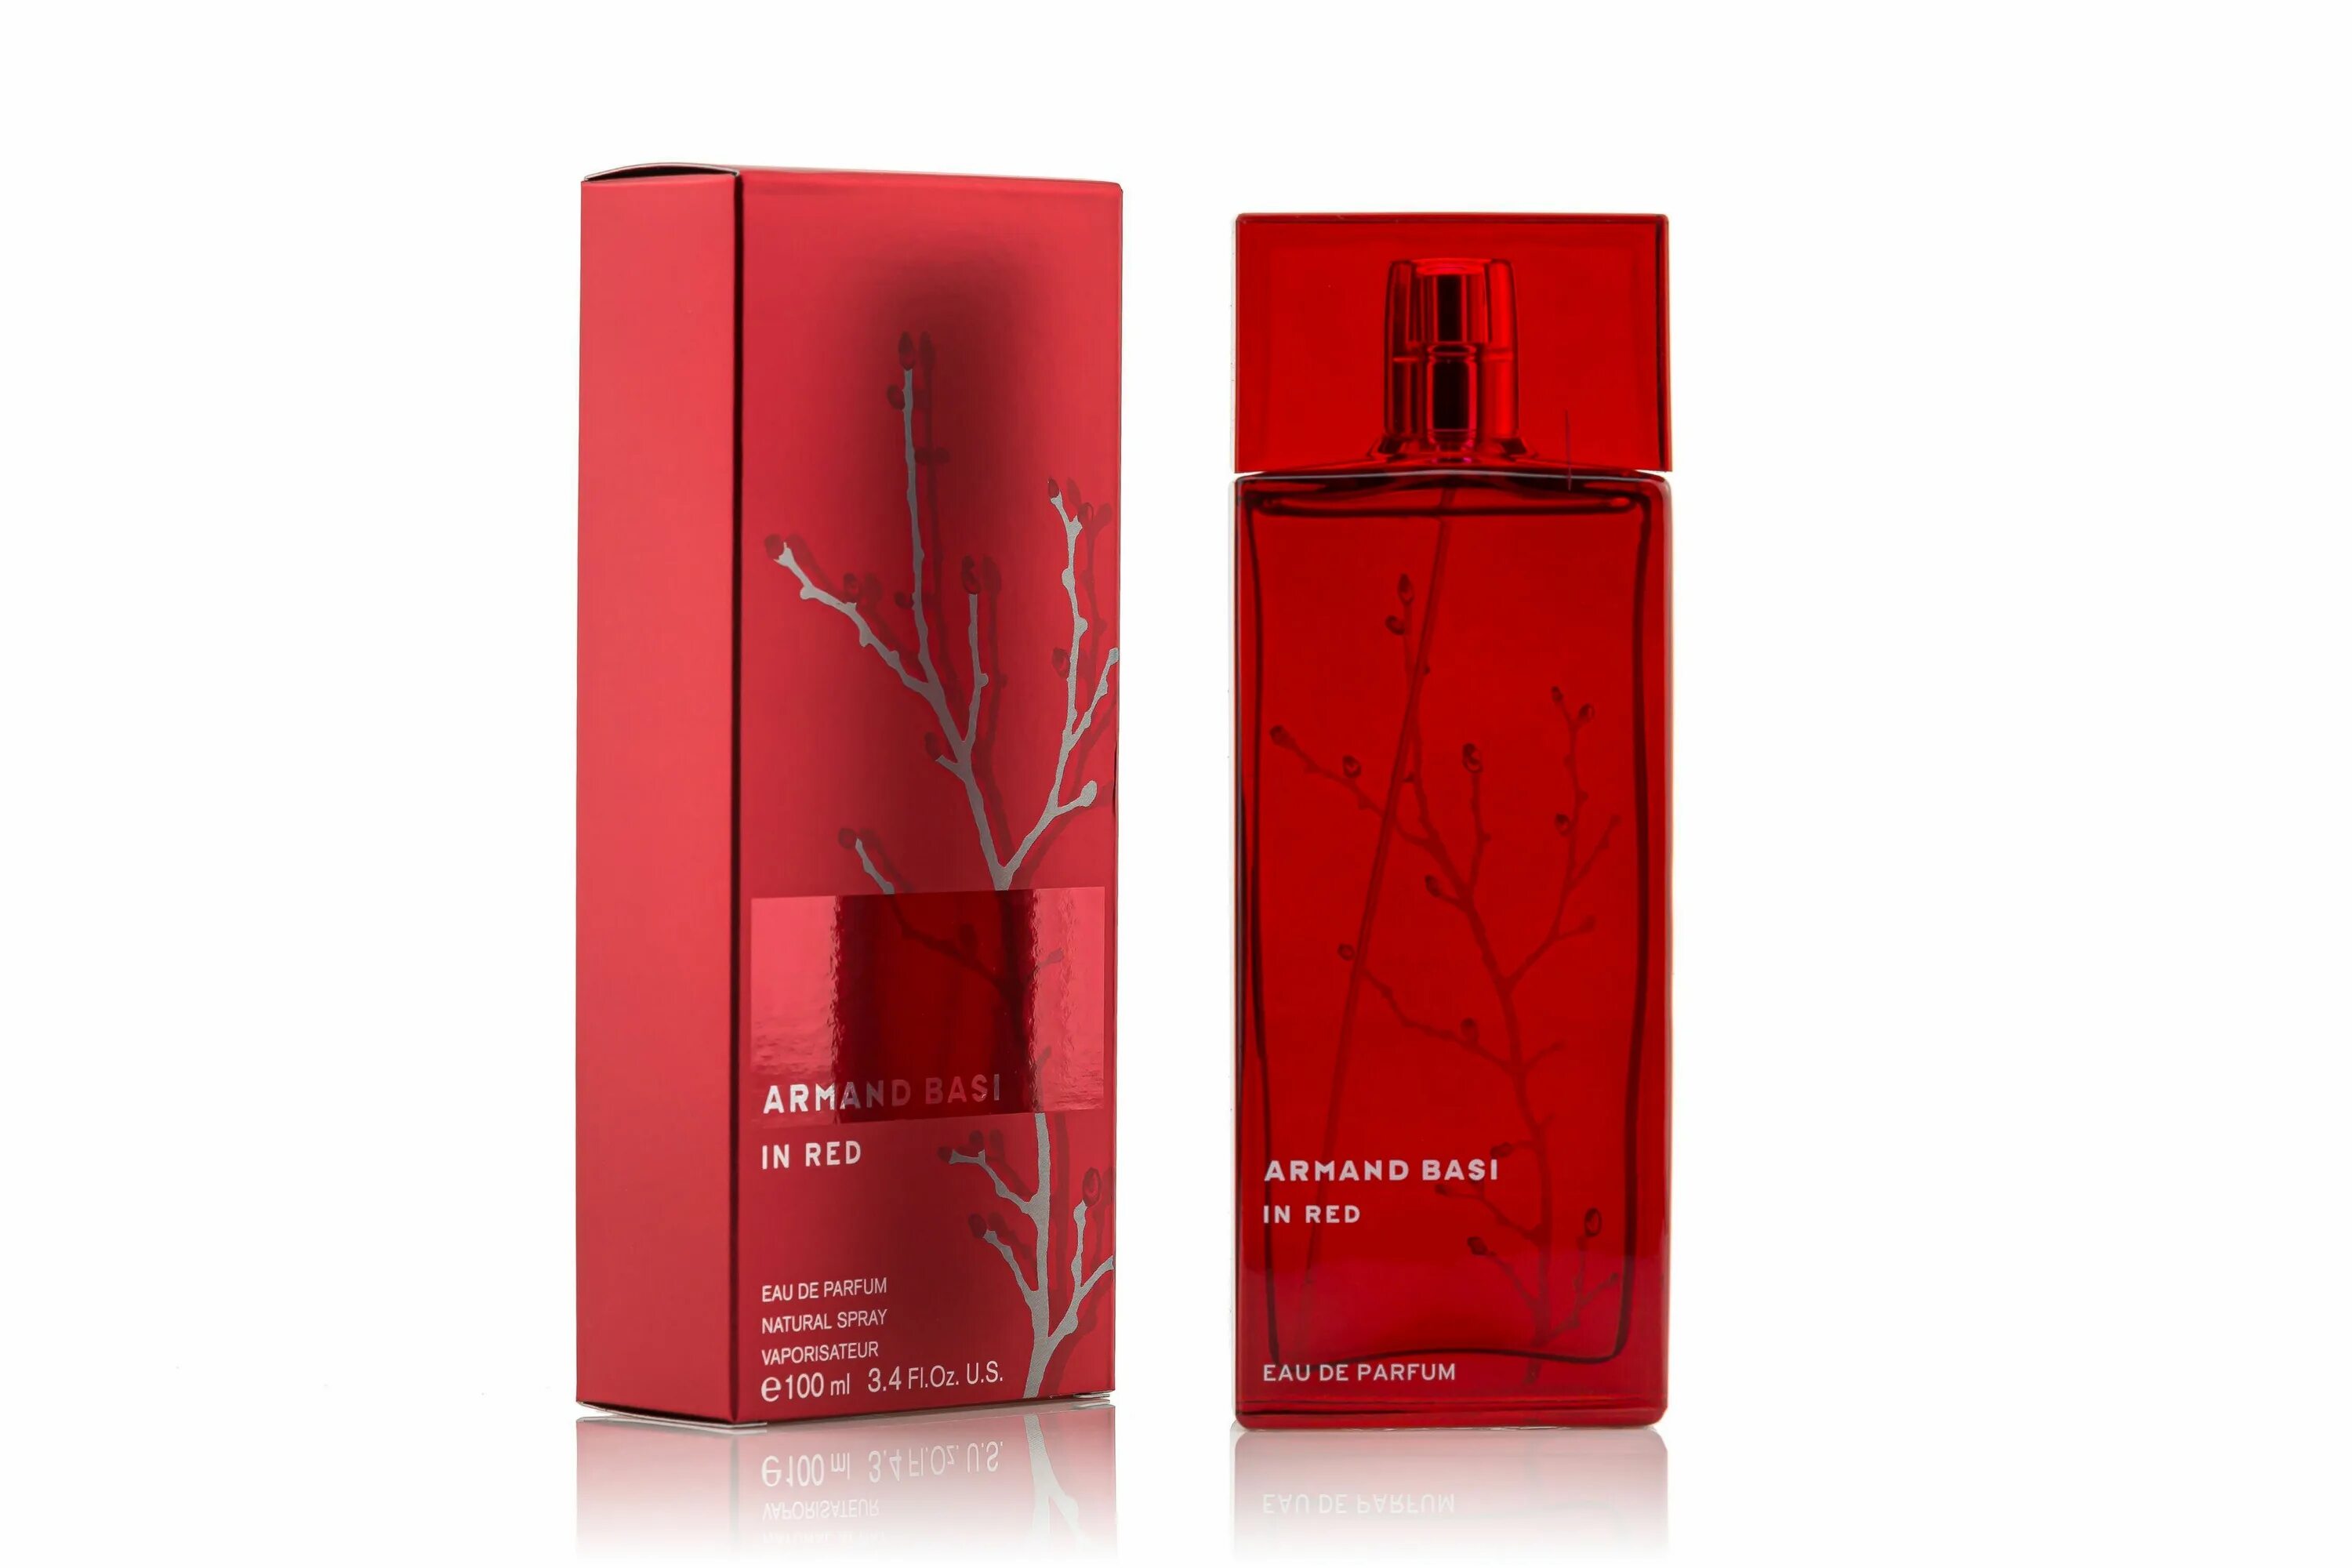 Armand basi in red цены. Armand basi in Red in Red 100 ml. Armand basi in Red 100ml EDP Test. In Red Armand basi, 100ml, EDT. Armand basi in Red Eau de Parfum 100.